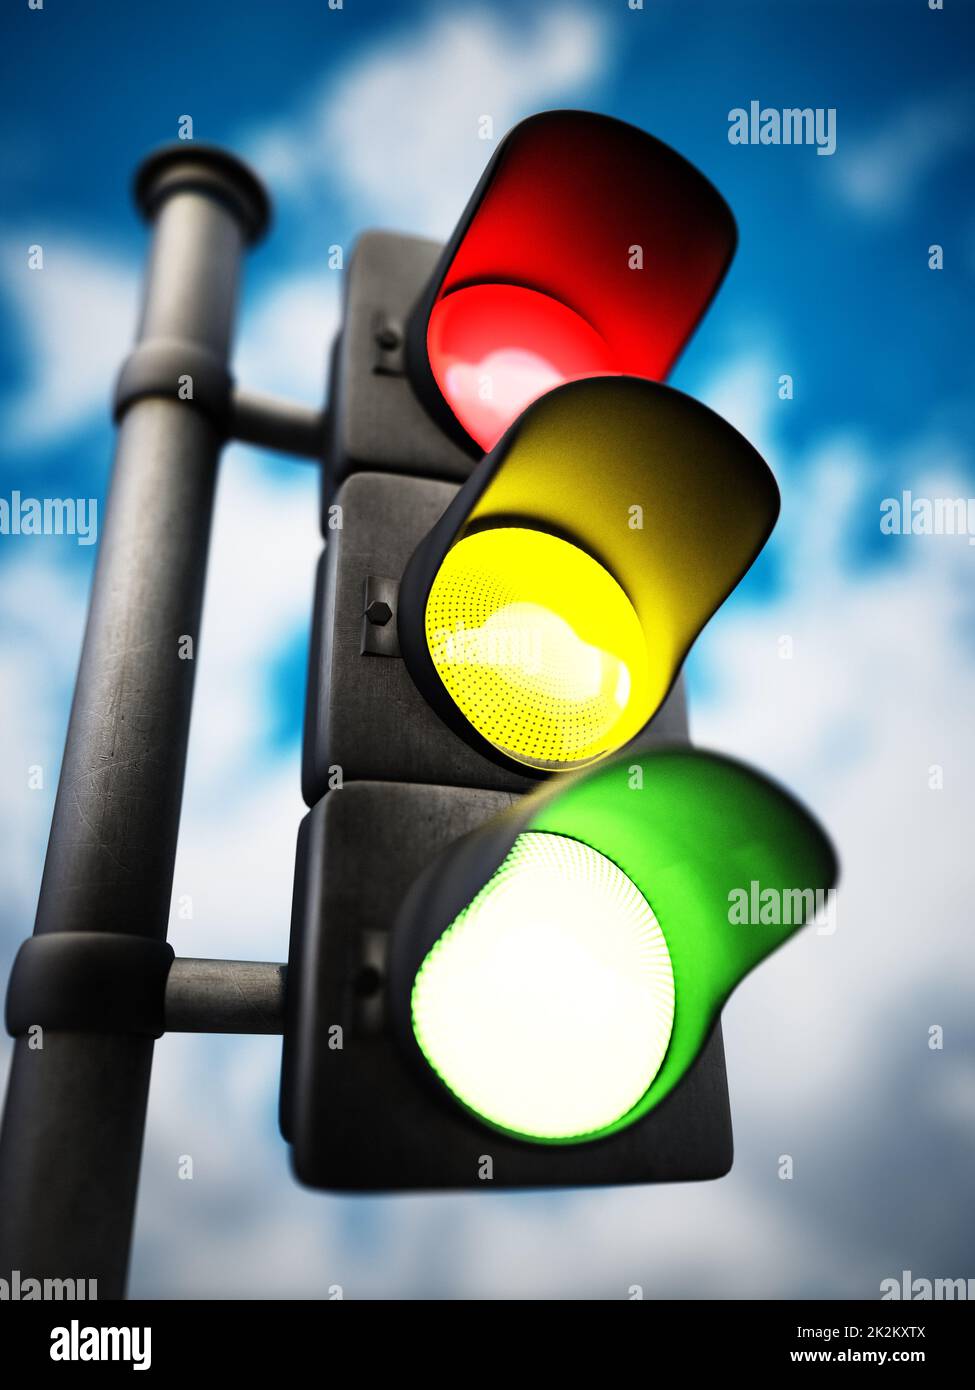 Traffic lamp with red, yellow and green lights on against blue background. 3D illustration Stock Photo